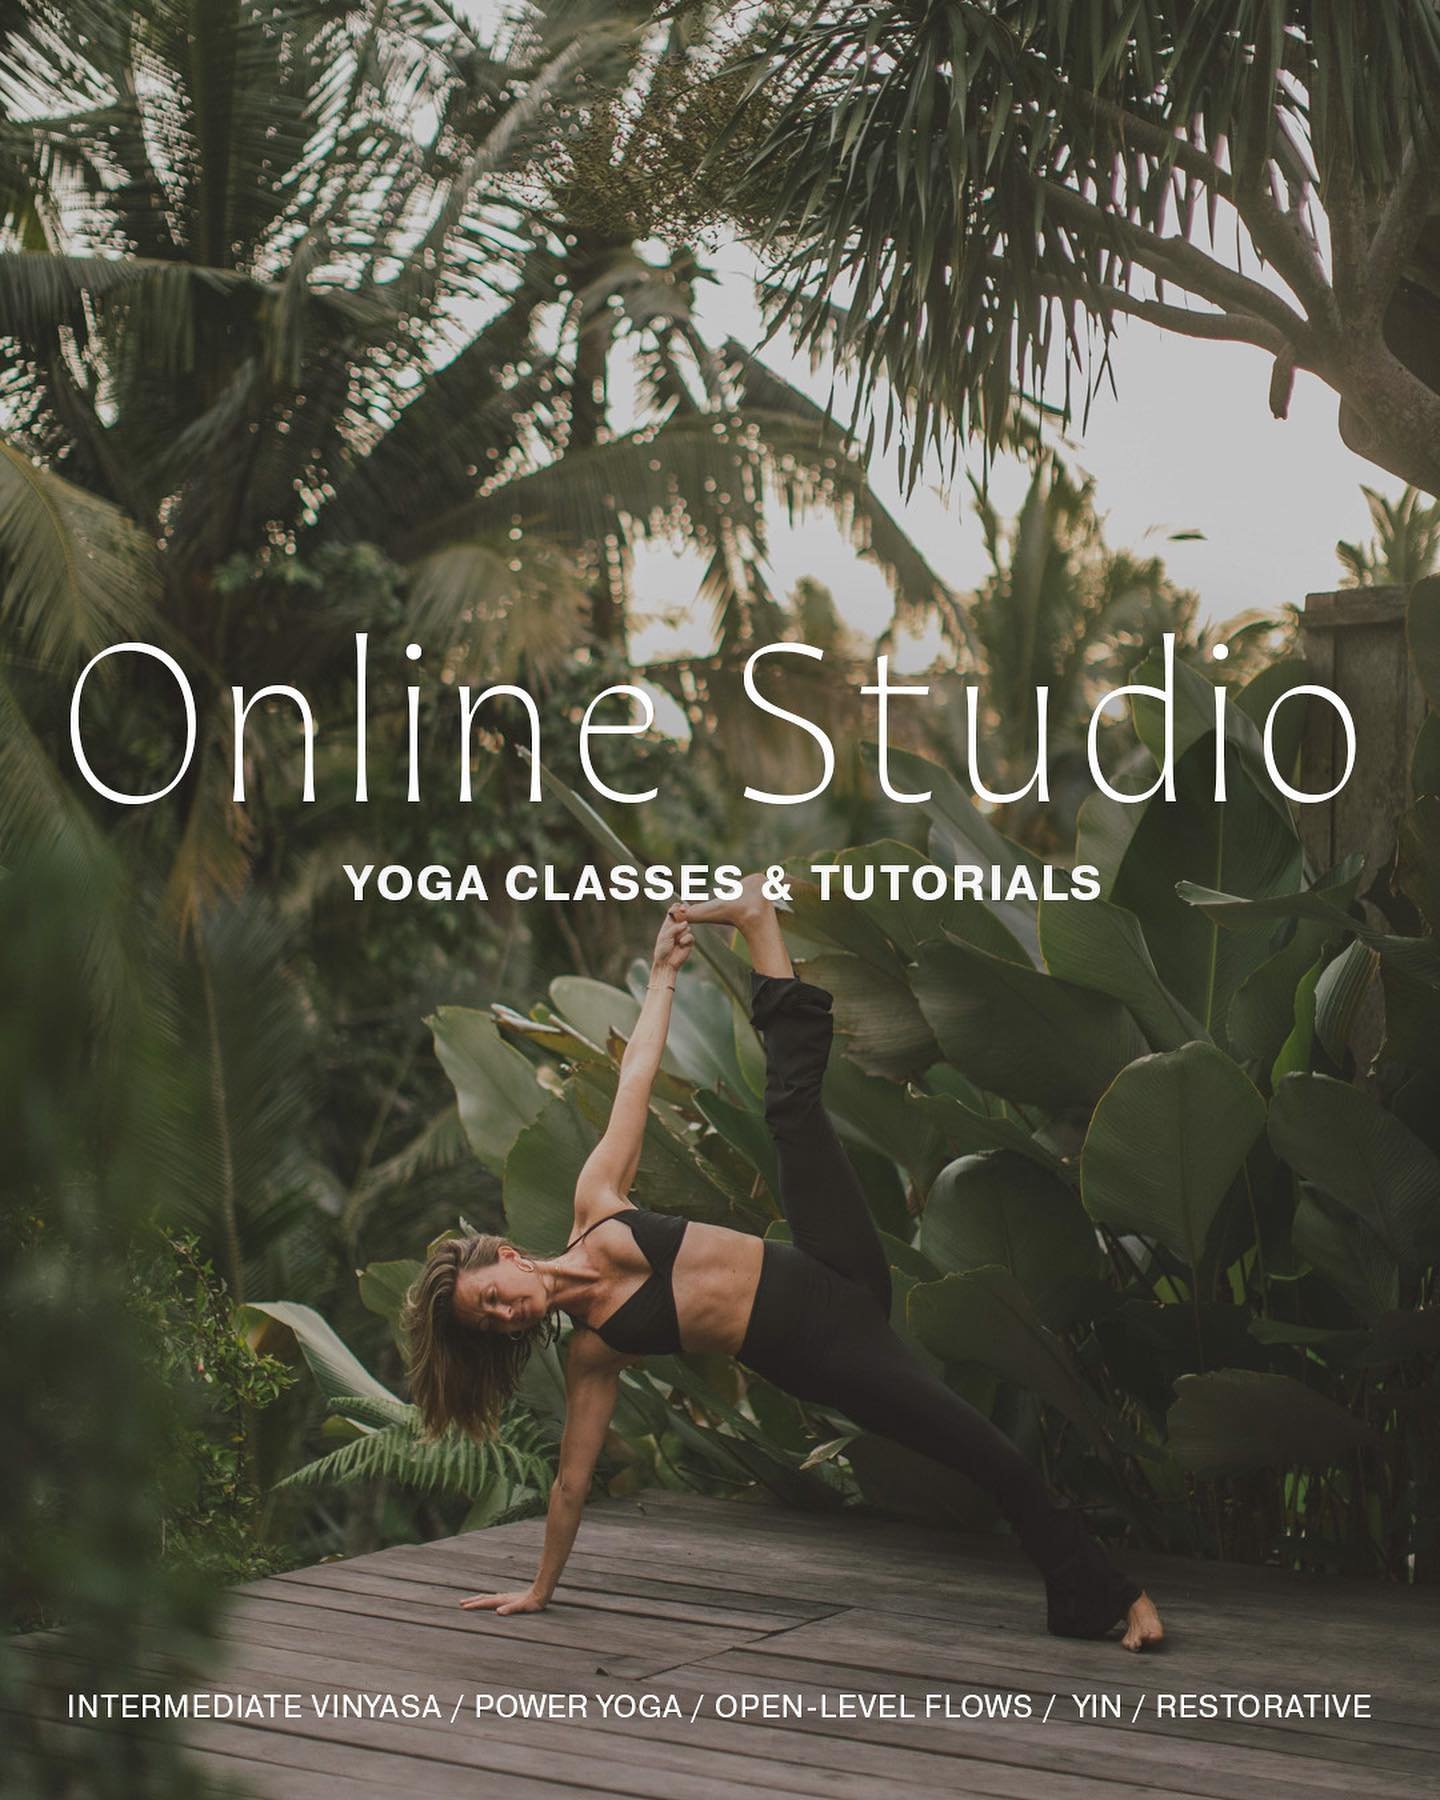 Join our online yoga studio &amp; get access to 80+ classes and tutorials! ✨ Everything from inversion how-to&rsquo;s and intermediate Vinyasa classes to gentle morning flows and restorative.

We know that life easily can get in the way of your yoga 